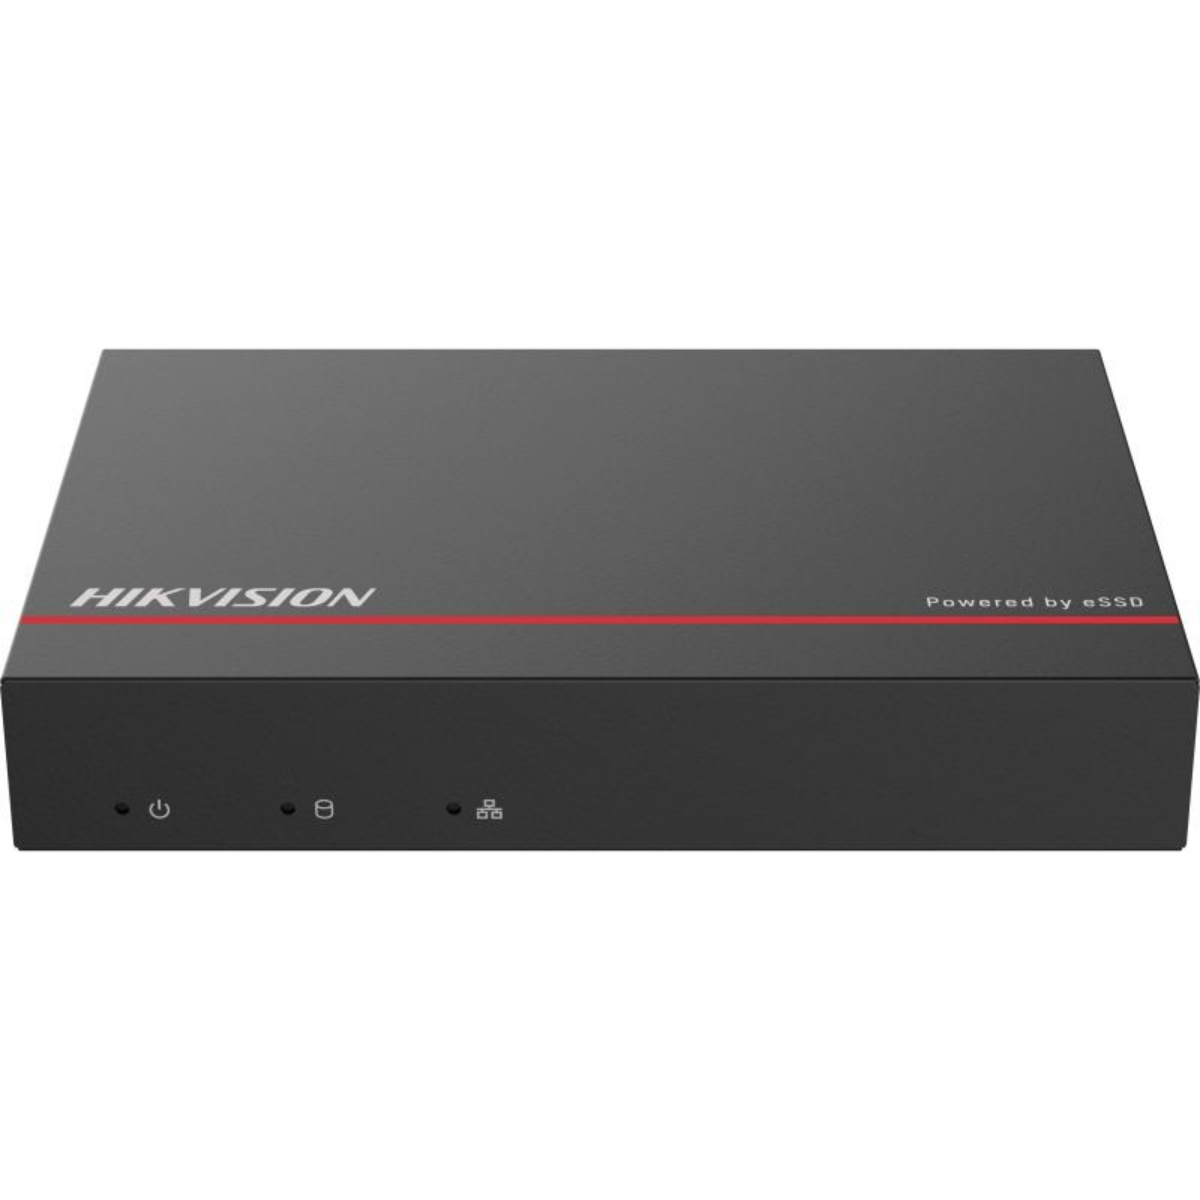 Hikvision eNVR POE 4 channel with eSSD Technology, Built-In 1TB SSD  – DS‐E04NI‐Q1_4P(SSD_1T)